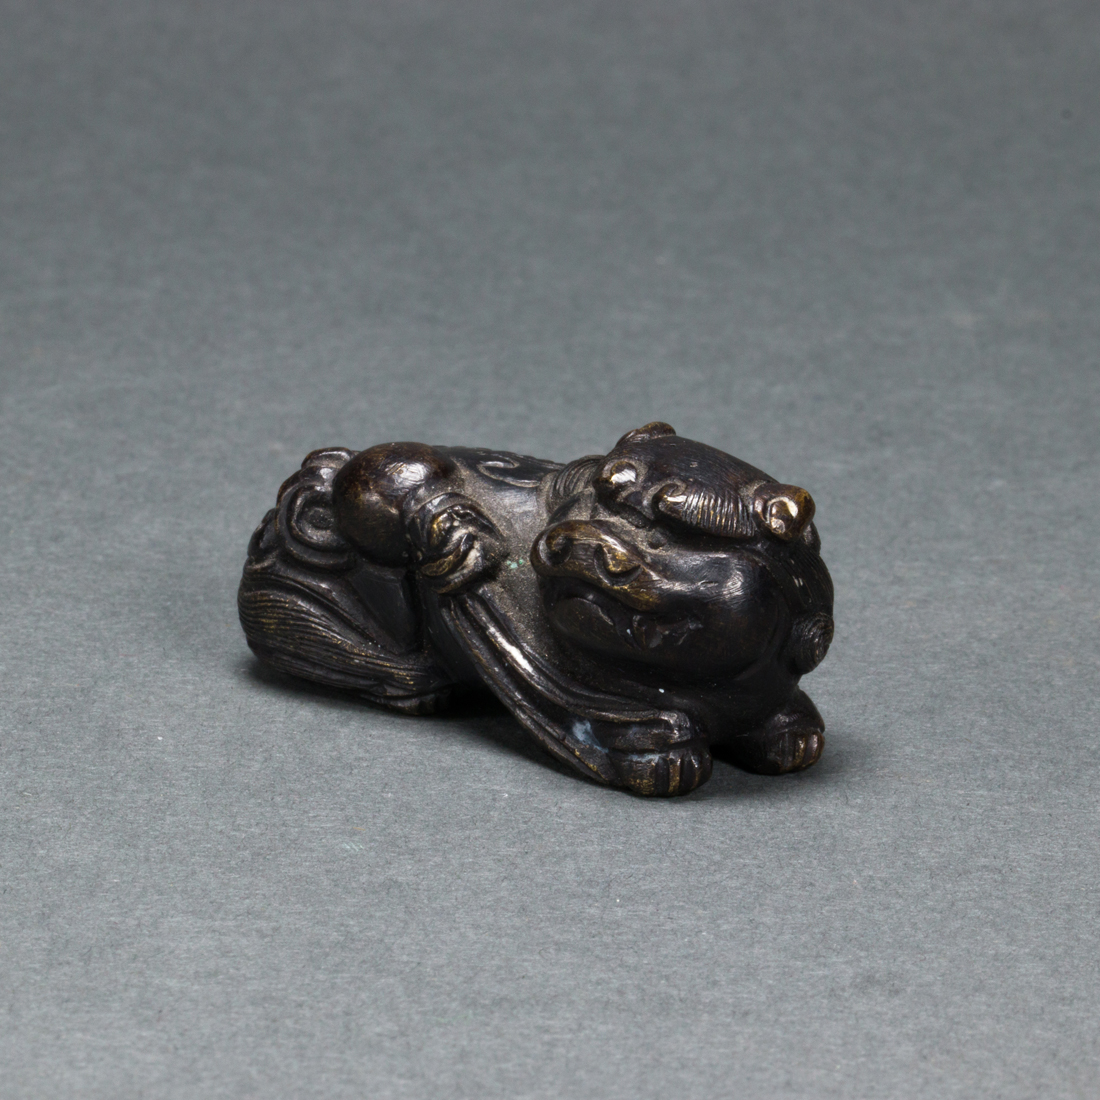 CHINESE BRONZE LION PAPERWEIGHT 3a14ec